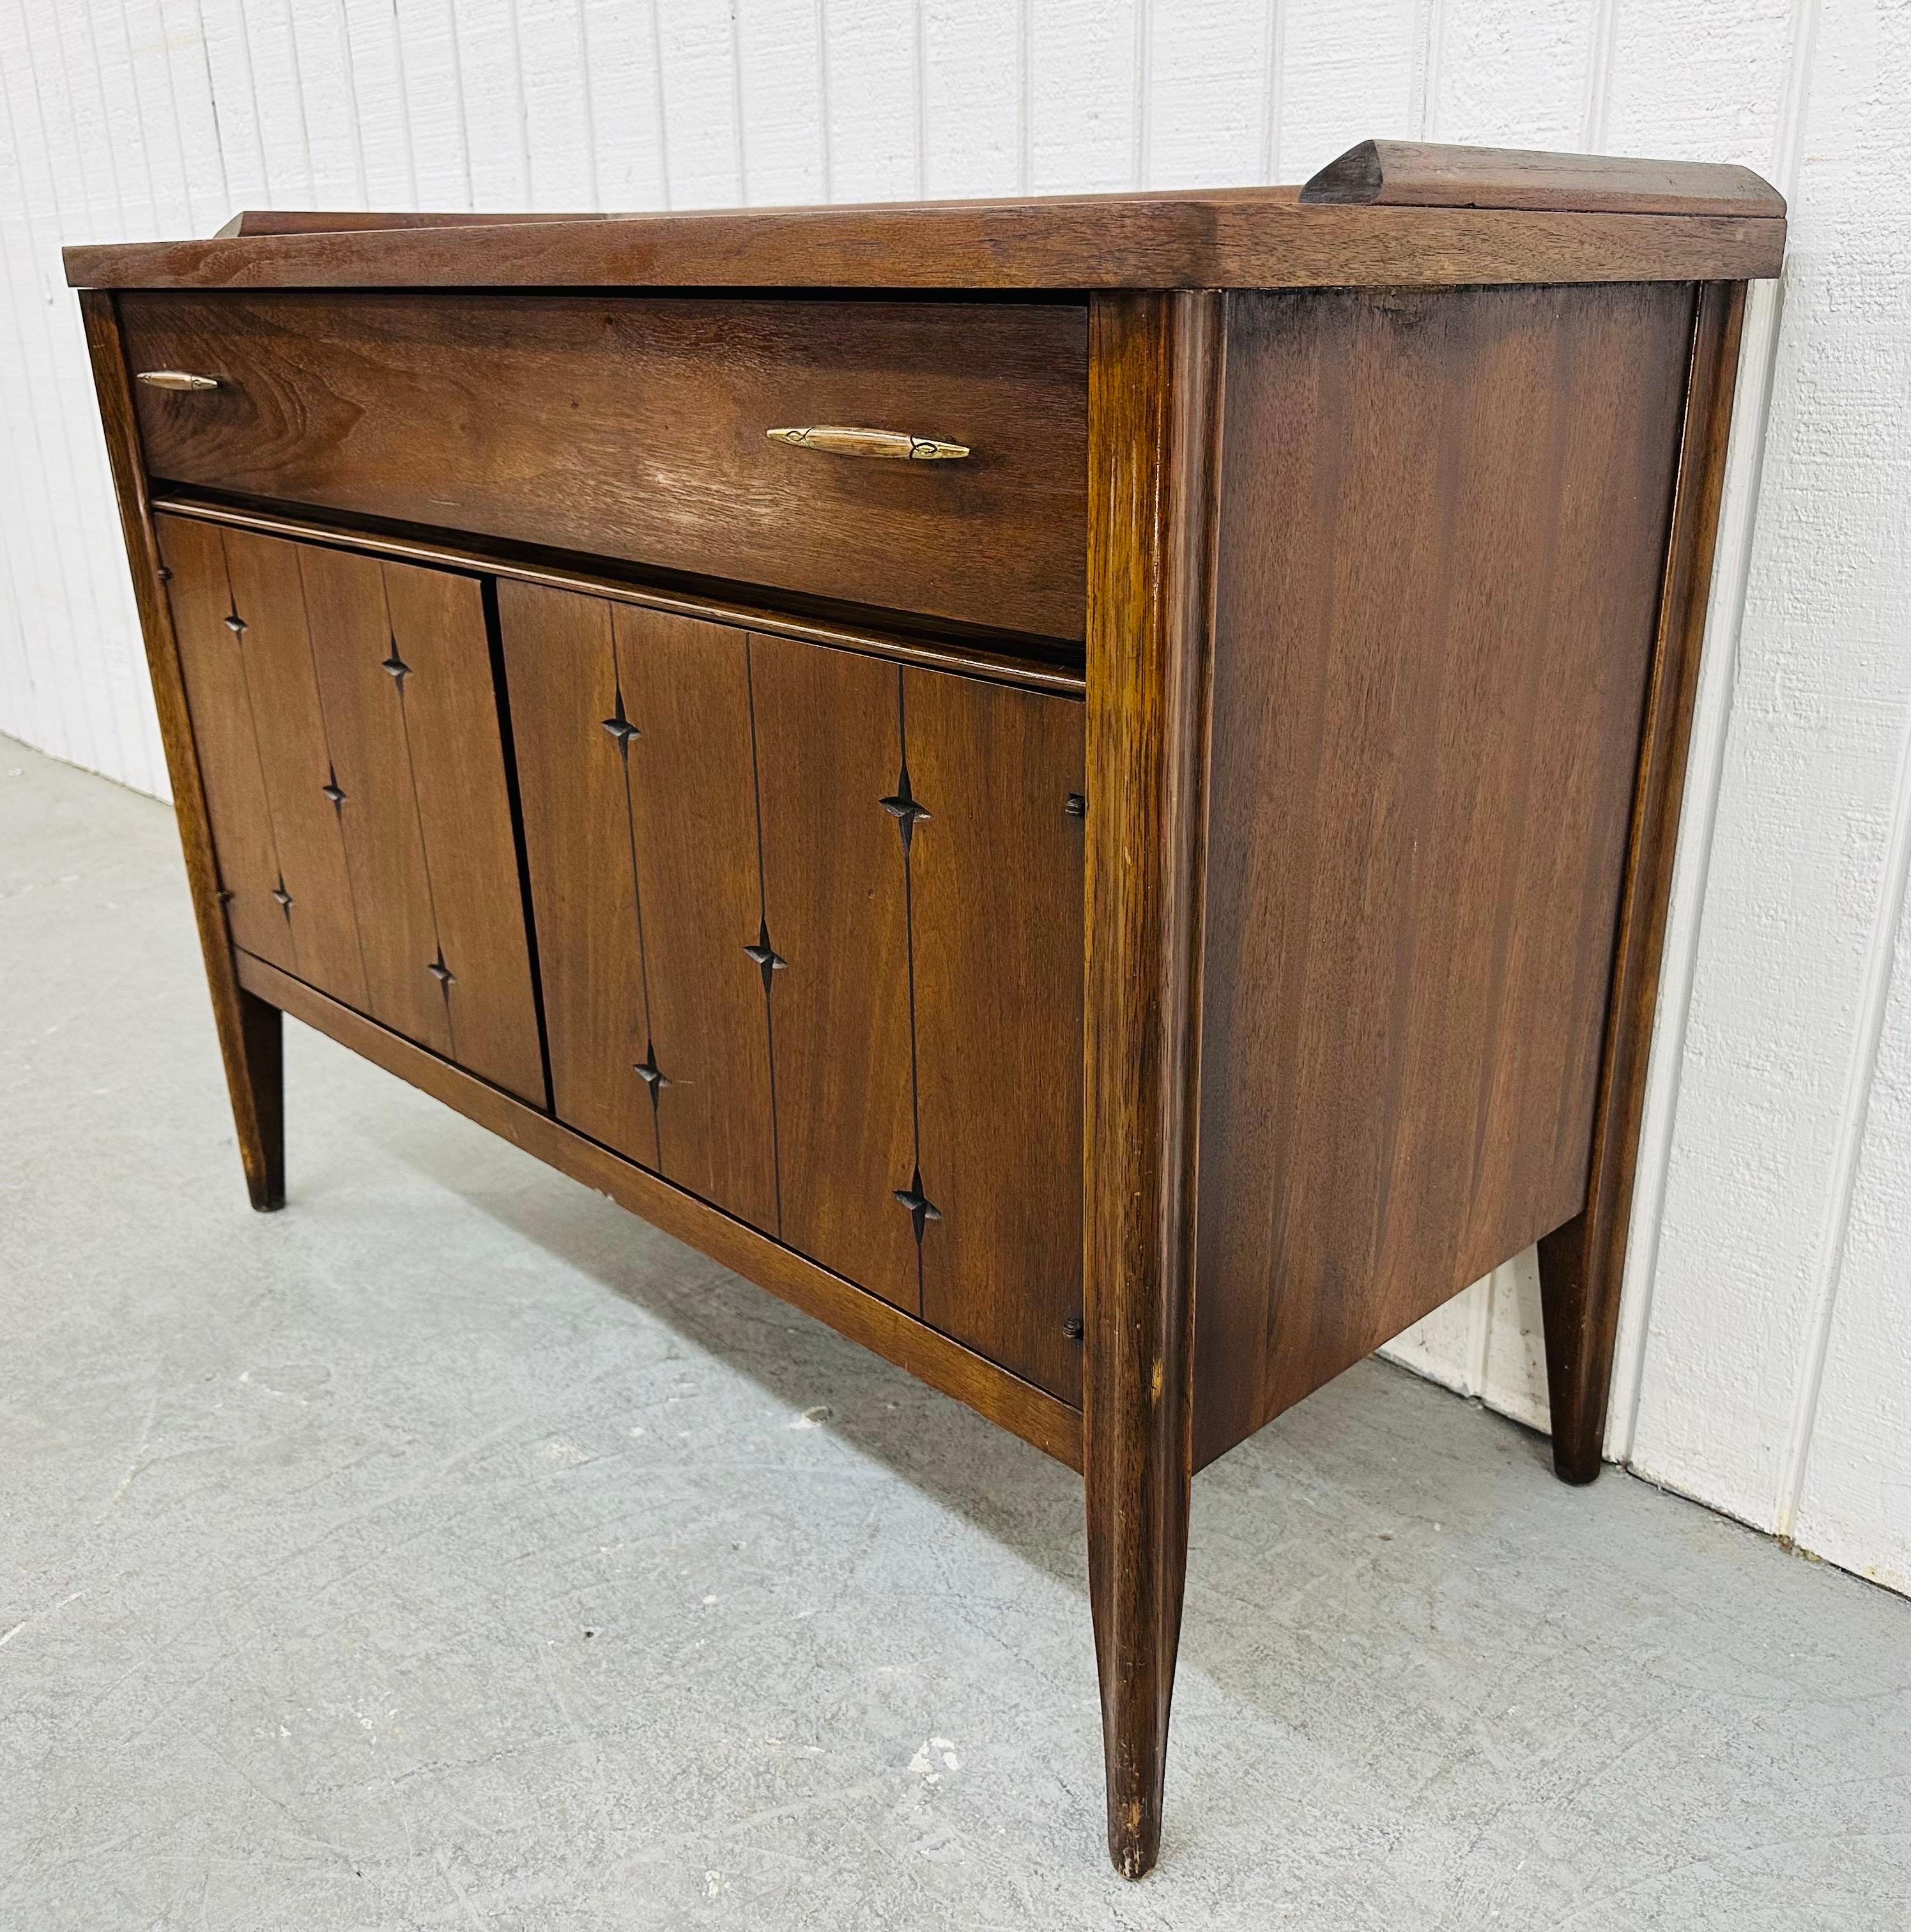 This listing is for a Mid-Century Modern Broyhill Saga Server. Featuring a straight, rectangular top with trim, single drawer with original hardware, two cabinet doors with Saga stars that open up to storage space, modern legs, and a beautiful